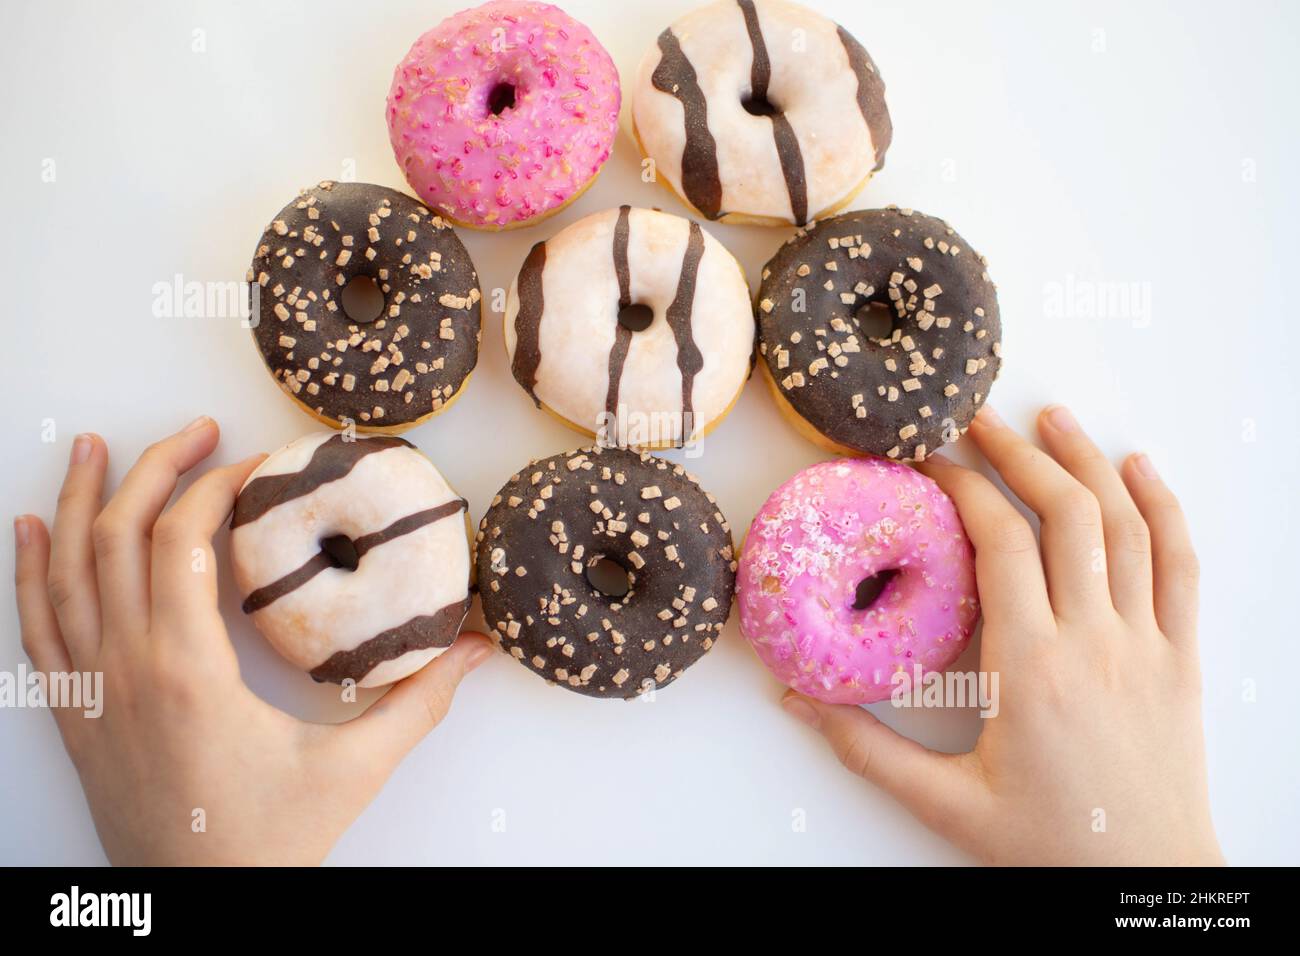 Colorful and sweet glazed donuts Stock Photo